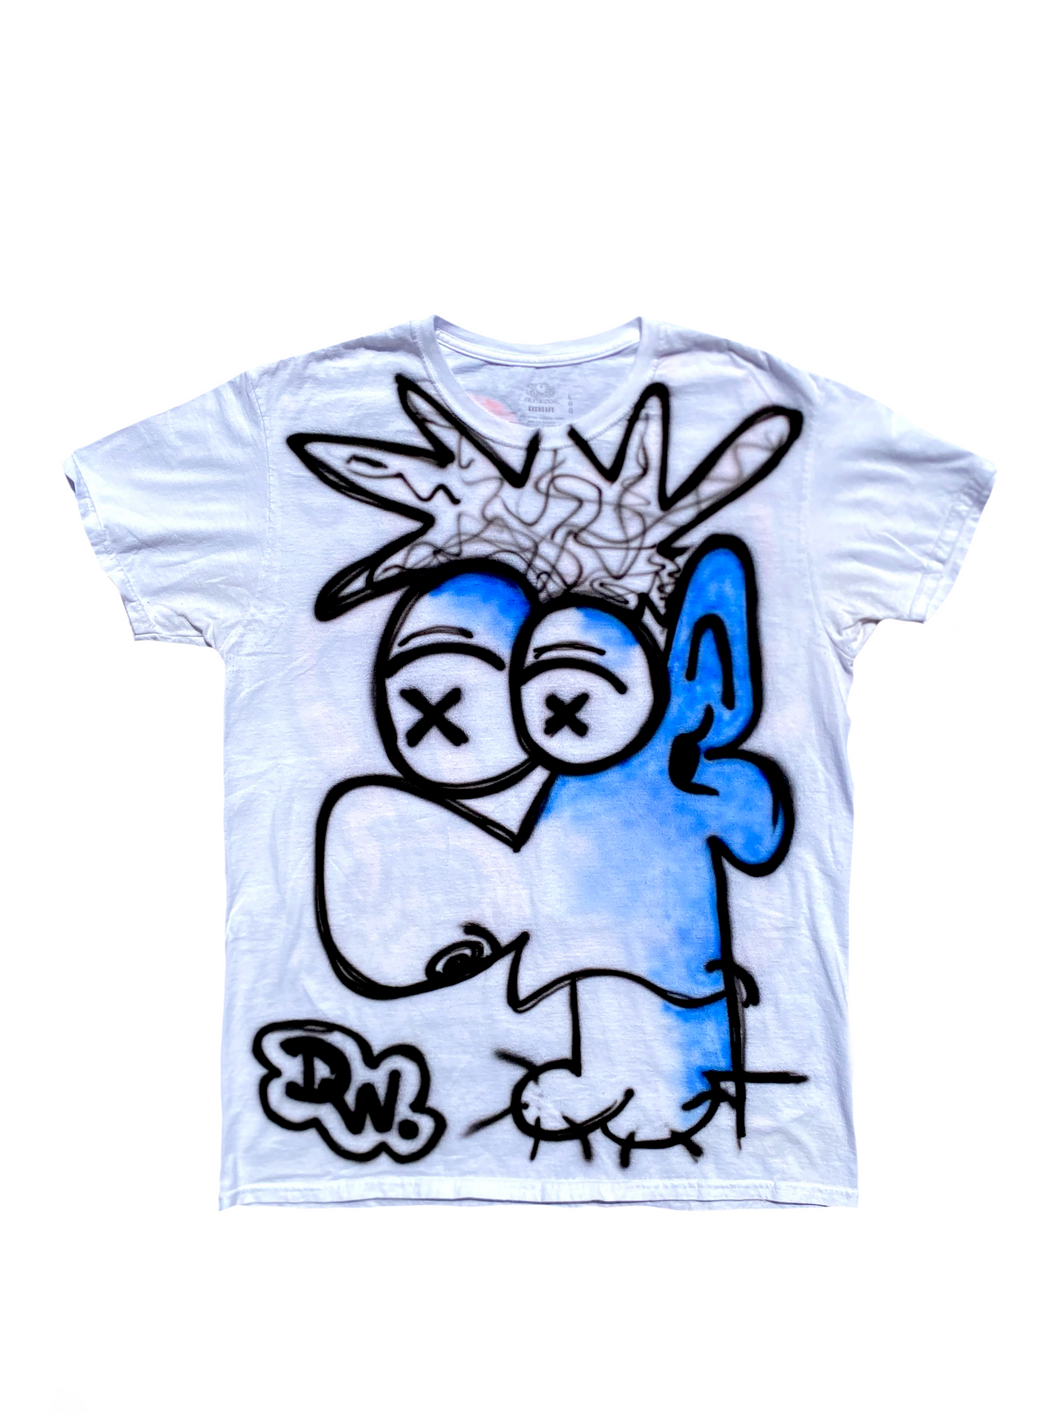 Don’t Be So Blue Airbrush Tee